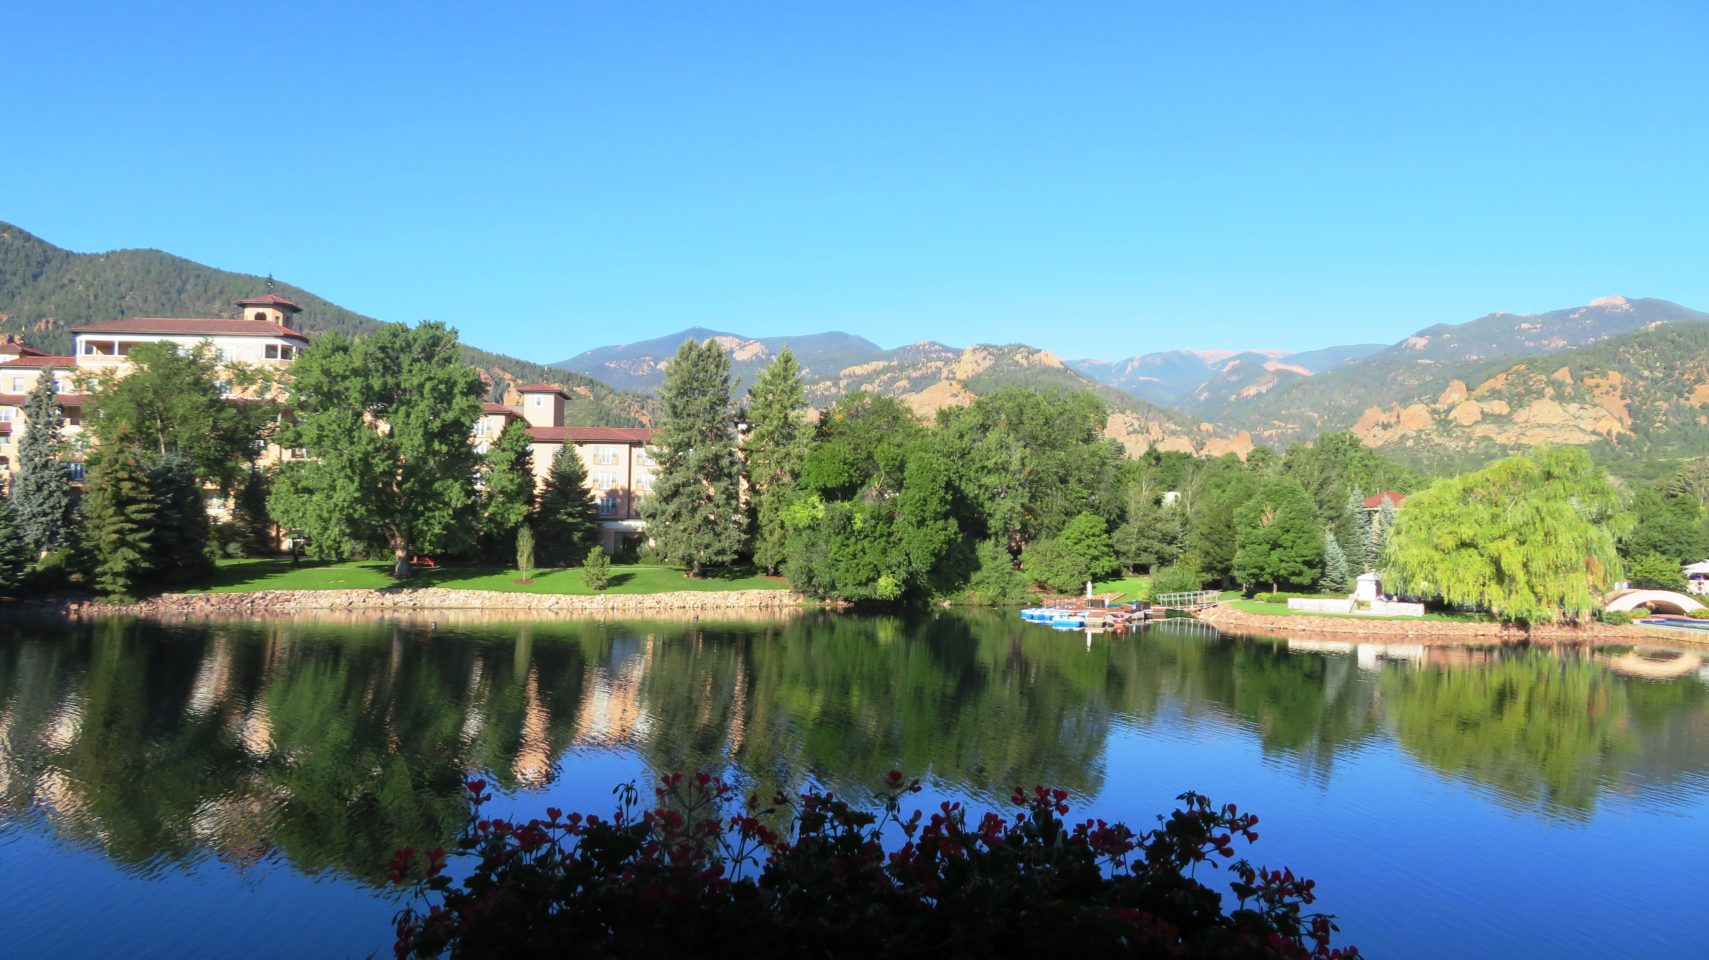 The Broadmoor Restaurants ~ Room Service breakfast comes with this incredible view !